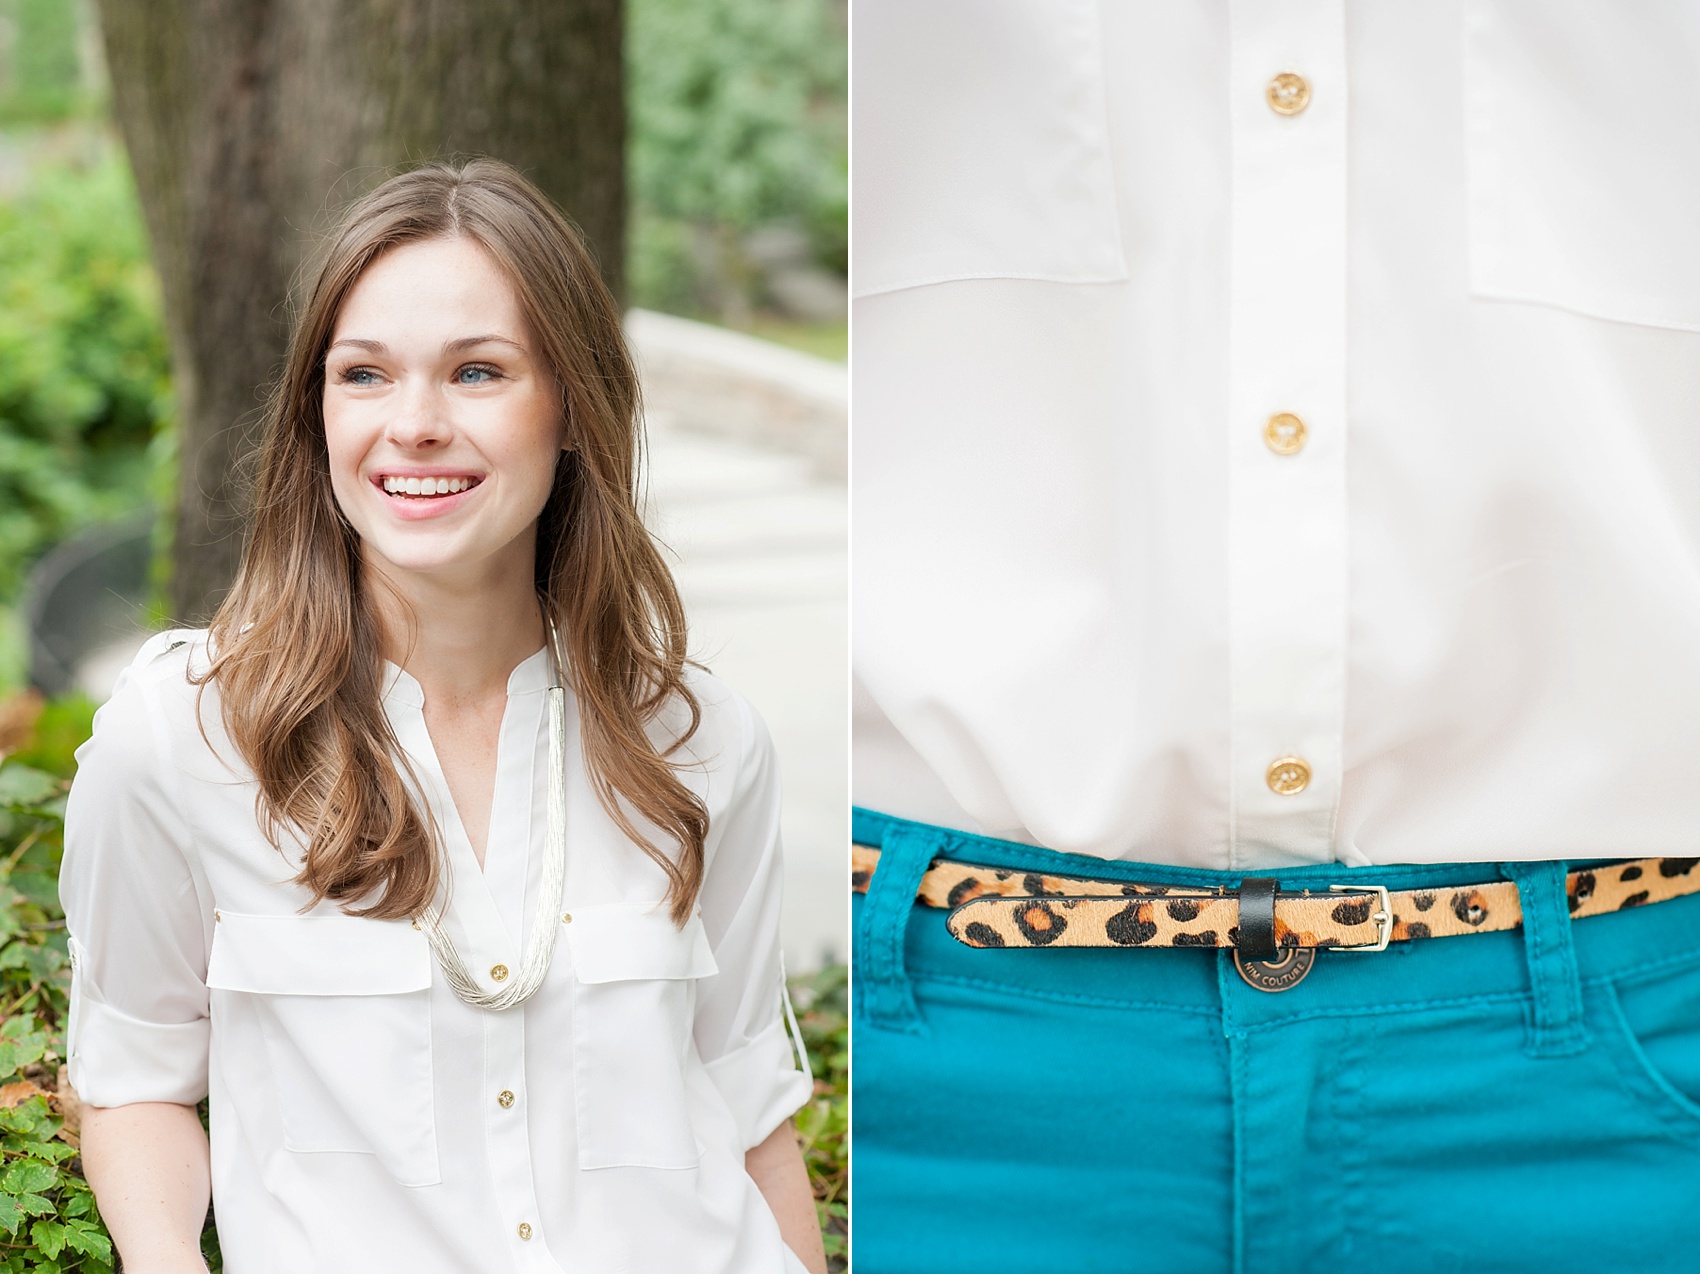 NYC engagement photo outfits: teal pants and leopard belt. Pictures by Mikkel Paige Photography at the Upper East Side's Carl Schurz Park.